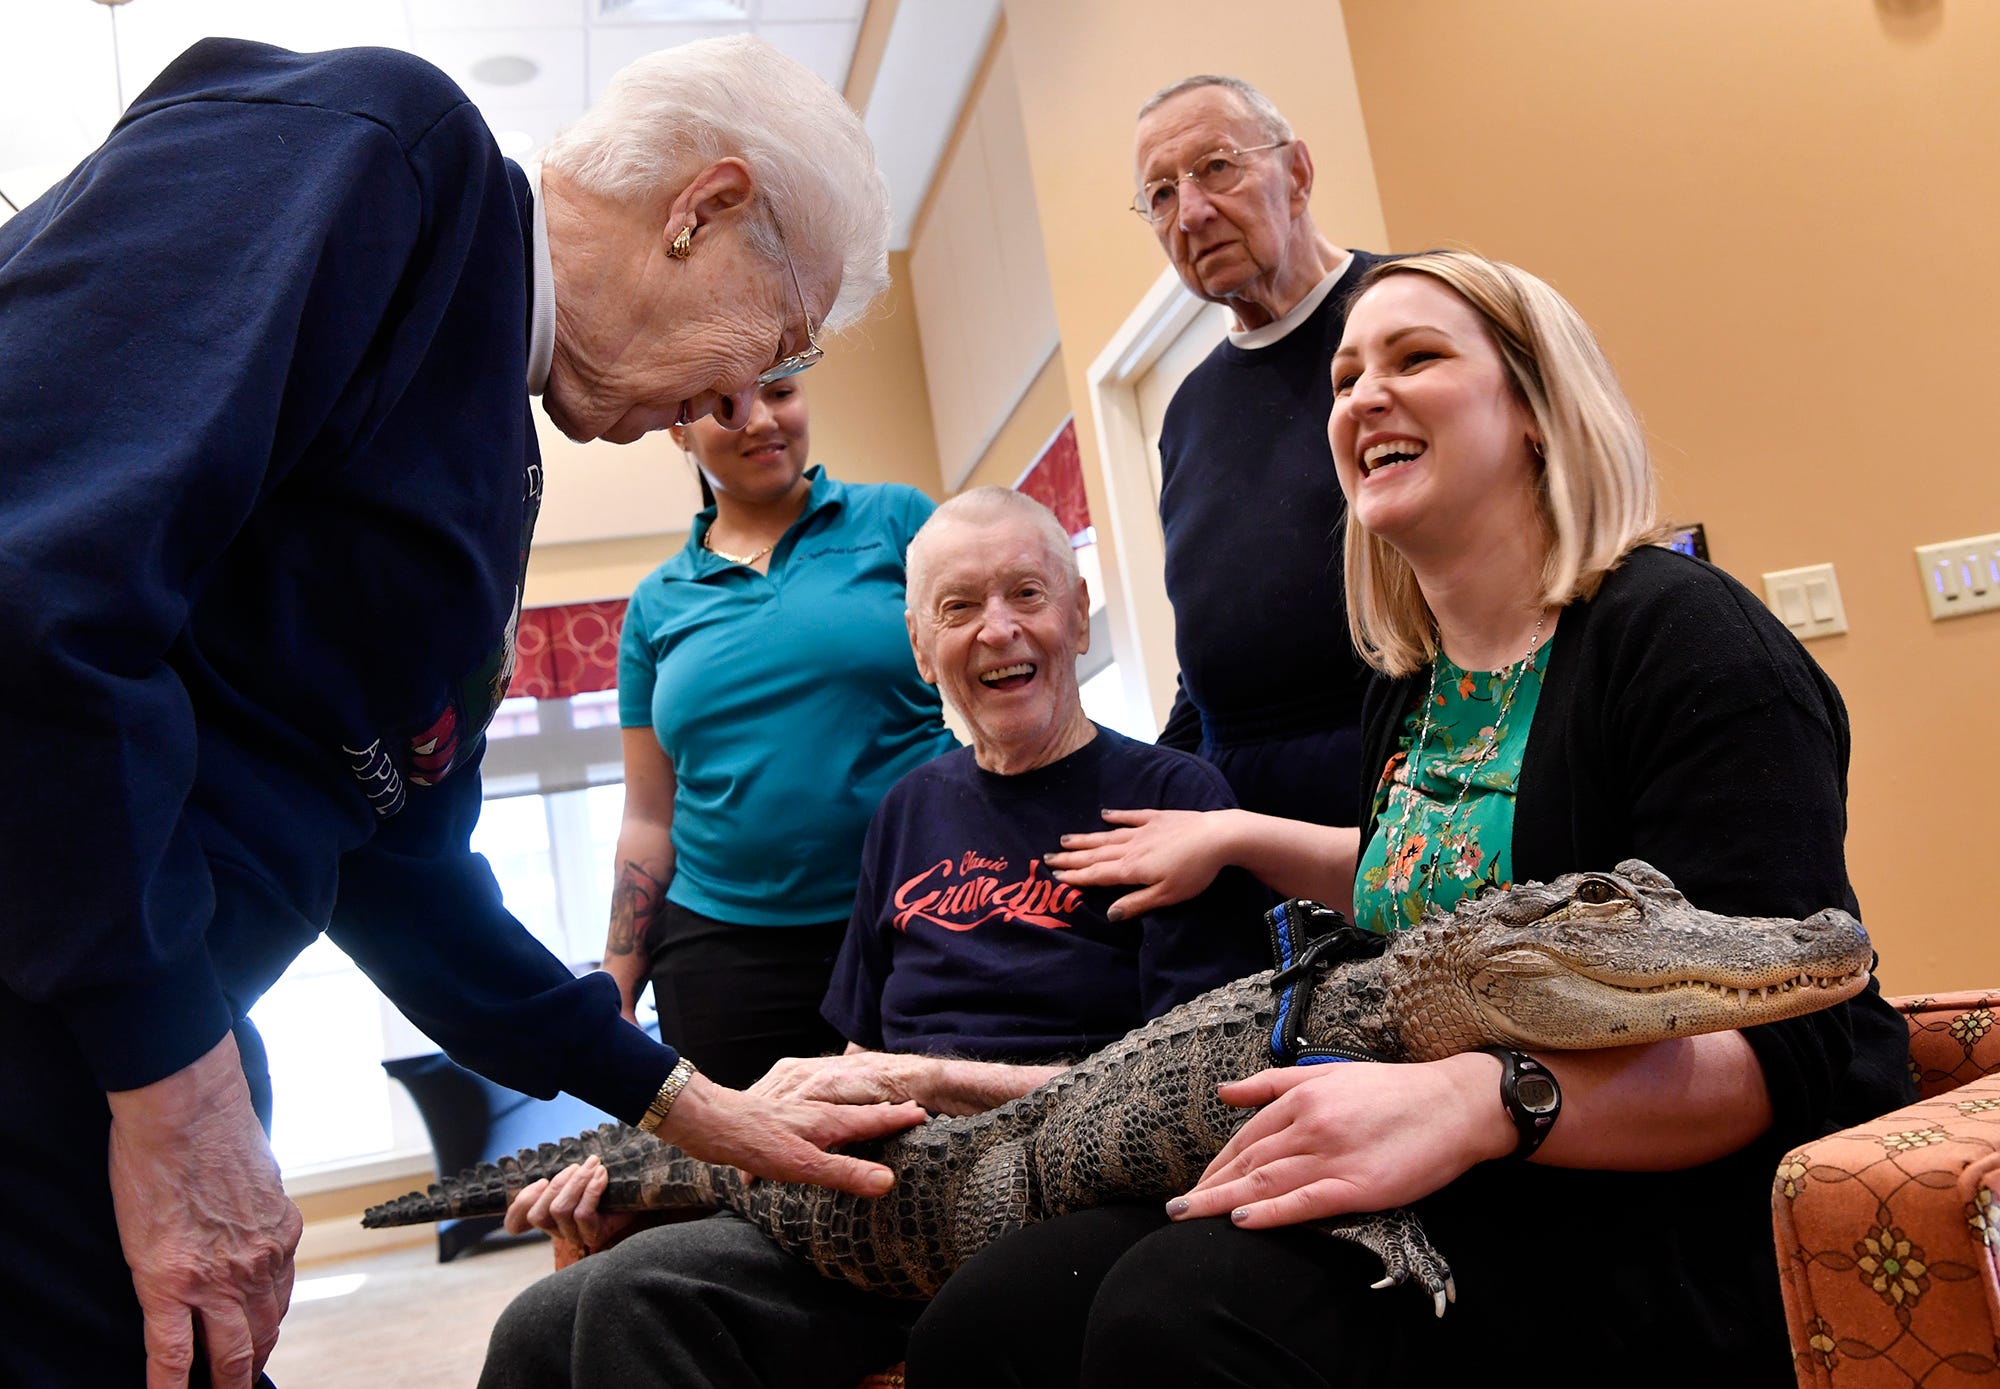 Joie Henney of Strinestown recently certified his rescued American alligator Wally as an emotional support animal. Friday, January 18, 2019
John A. Pavoncello photo